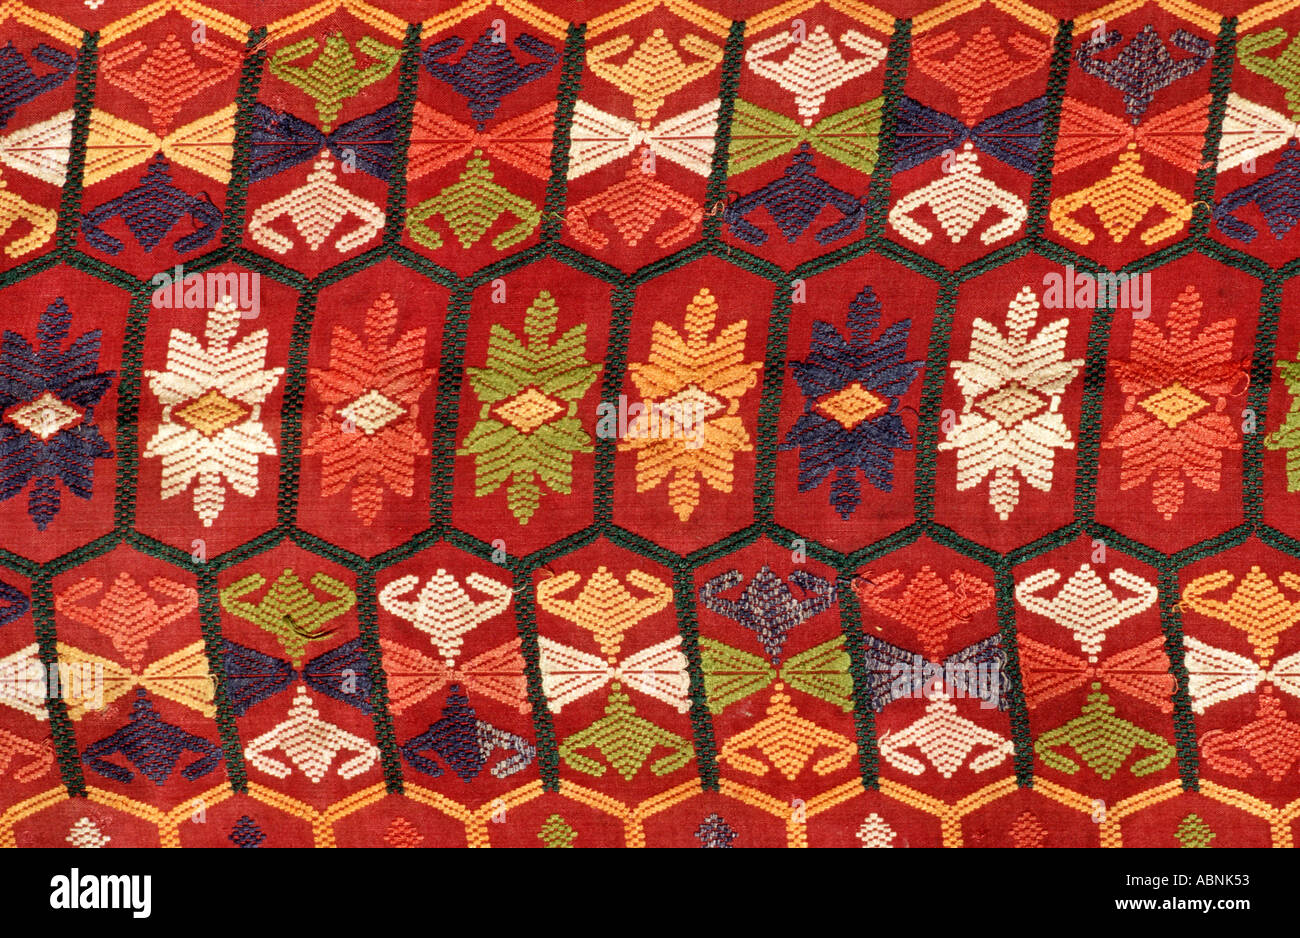 Supplementary weft brocaded textile from Bali Indonesia Stock Photo